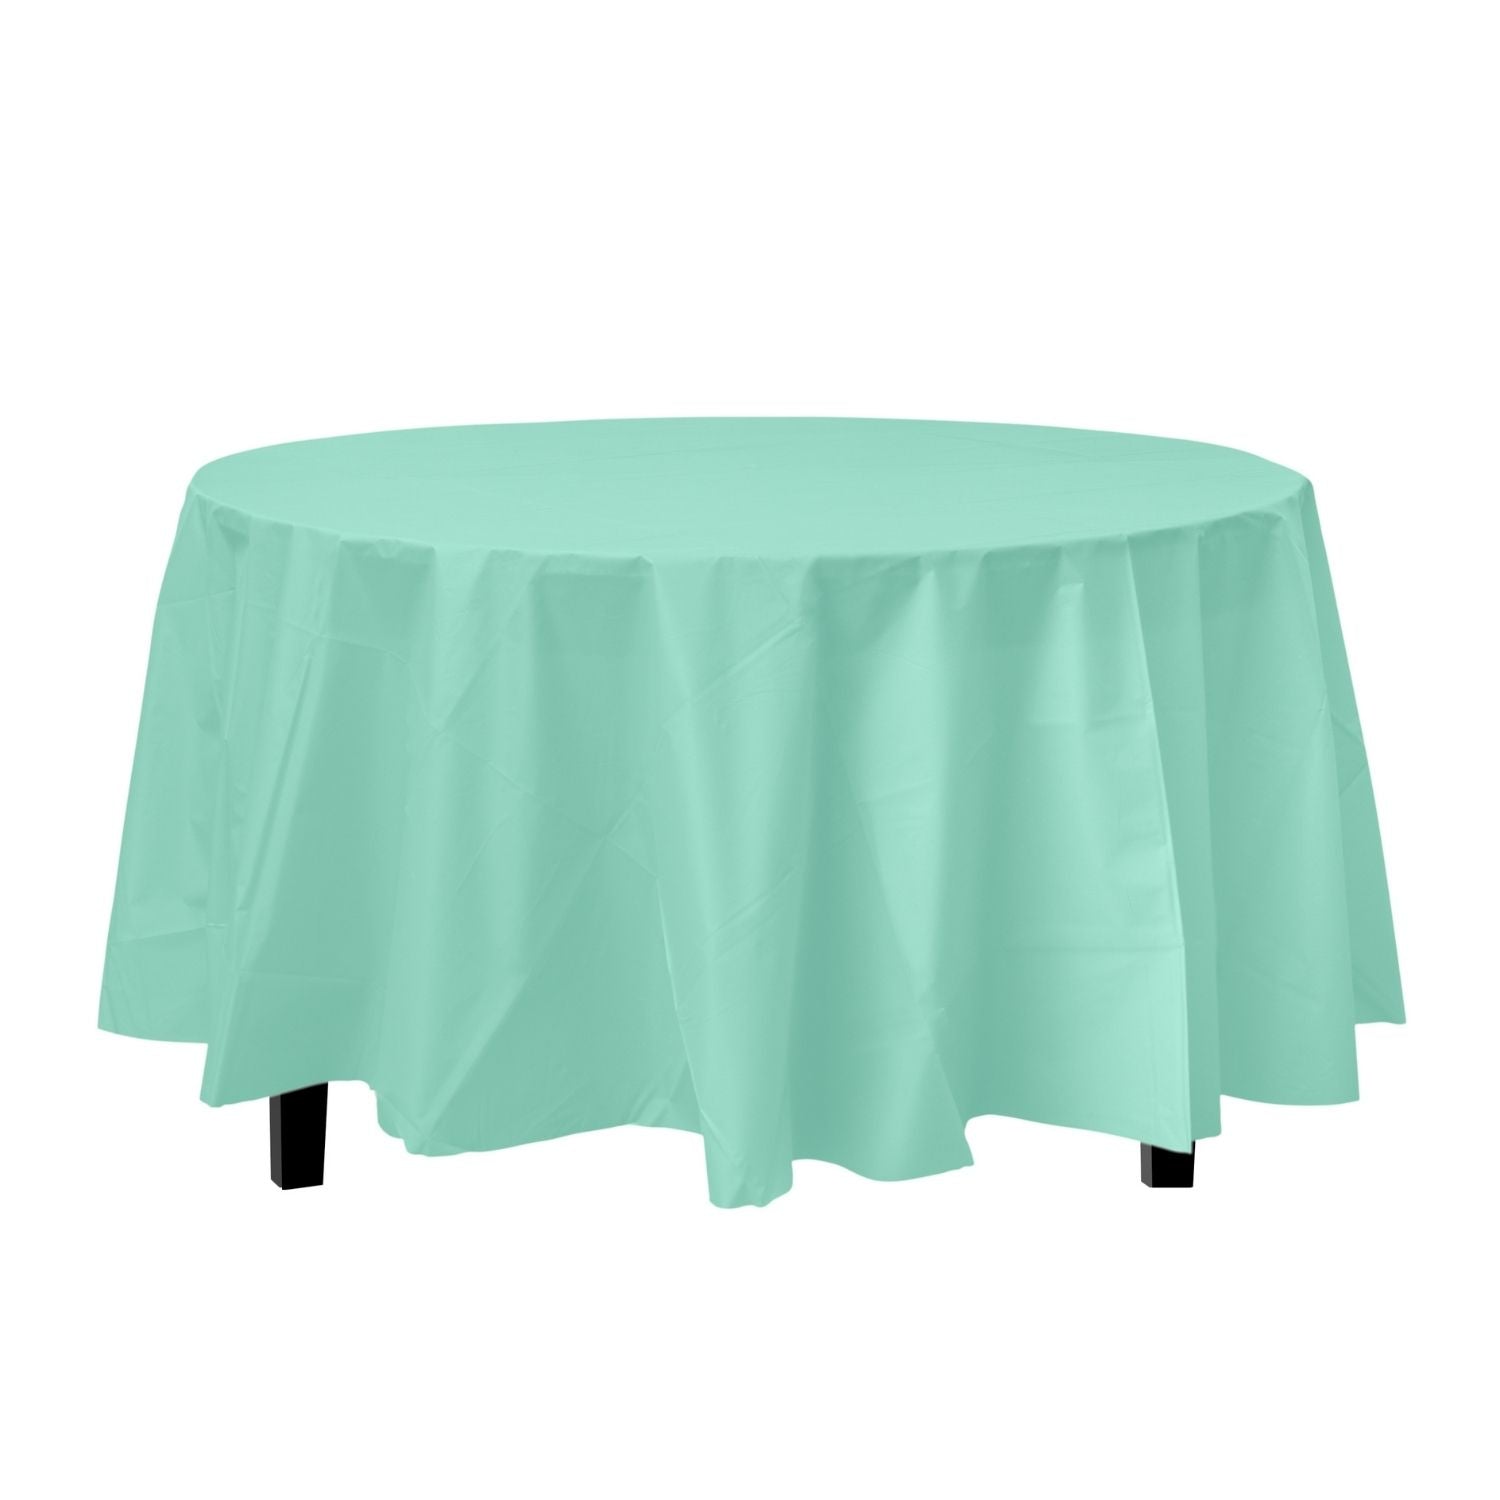 Mint Round Plastic Tablecloth | 48 Count - Yom Tov Settings